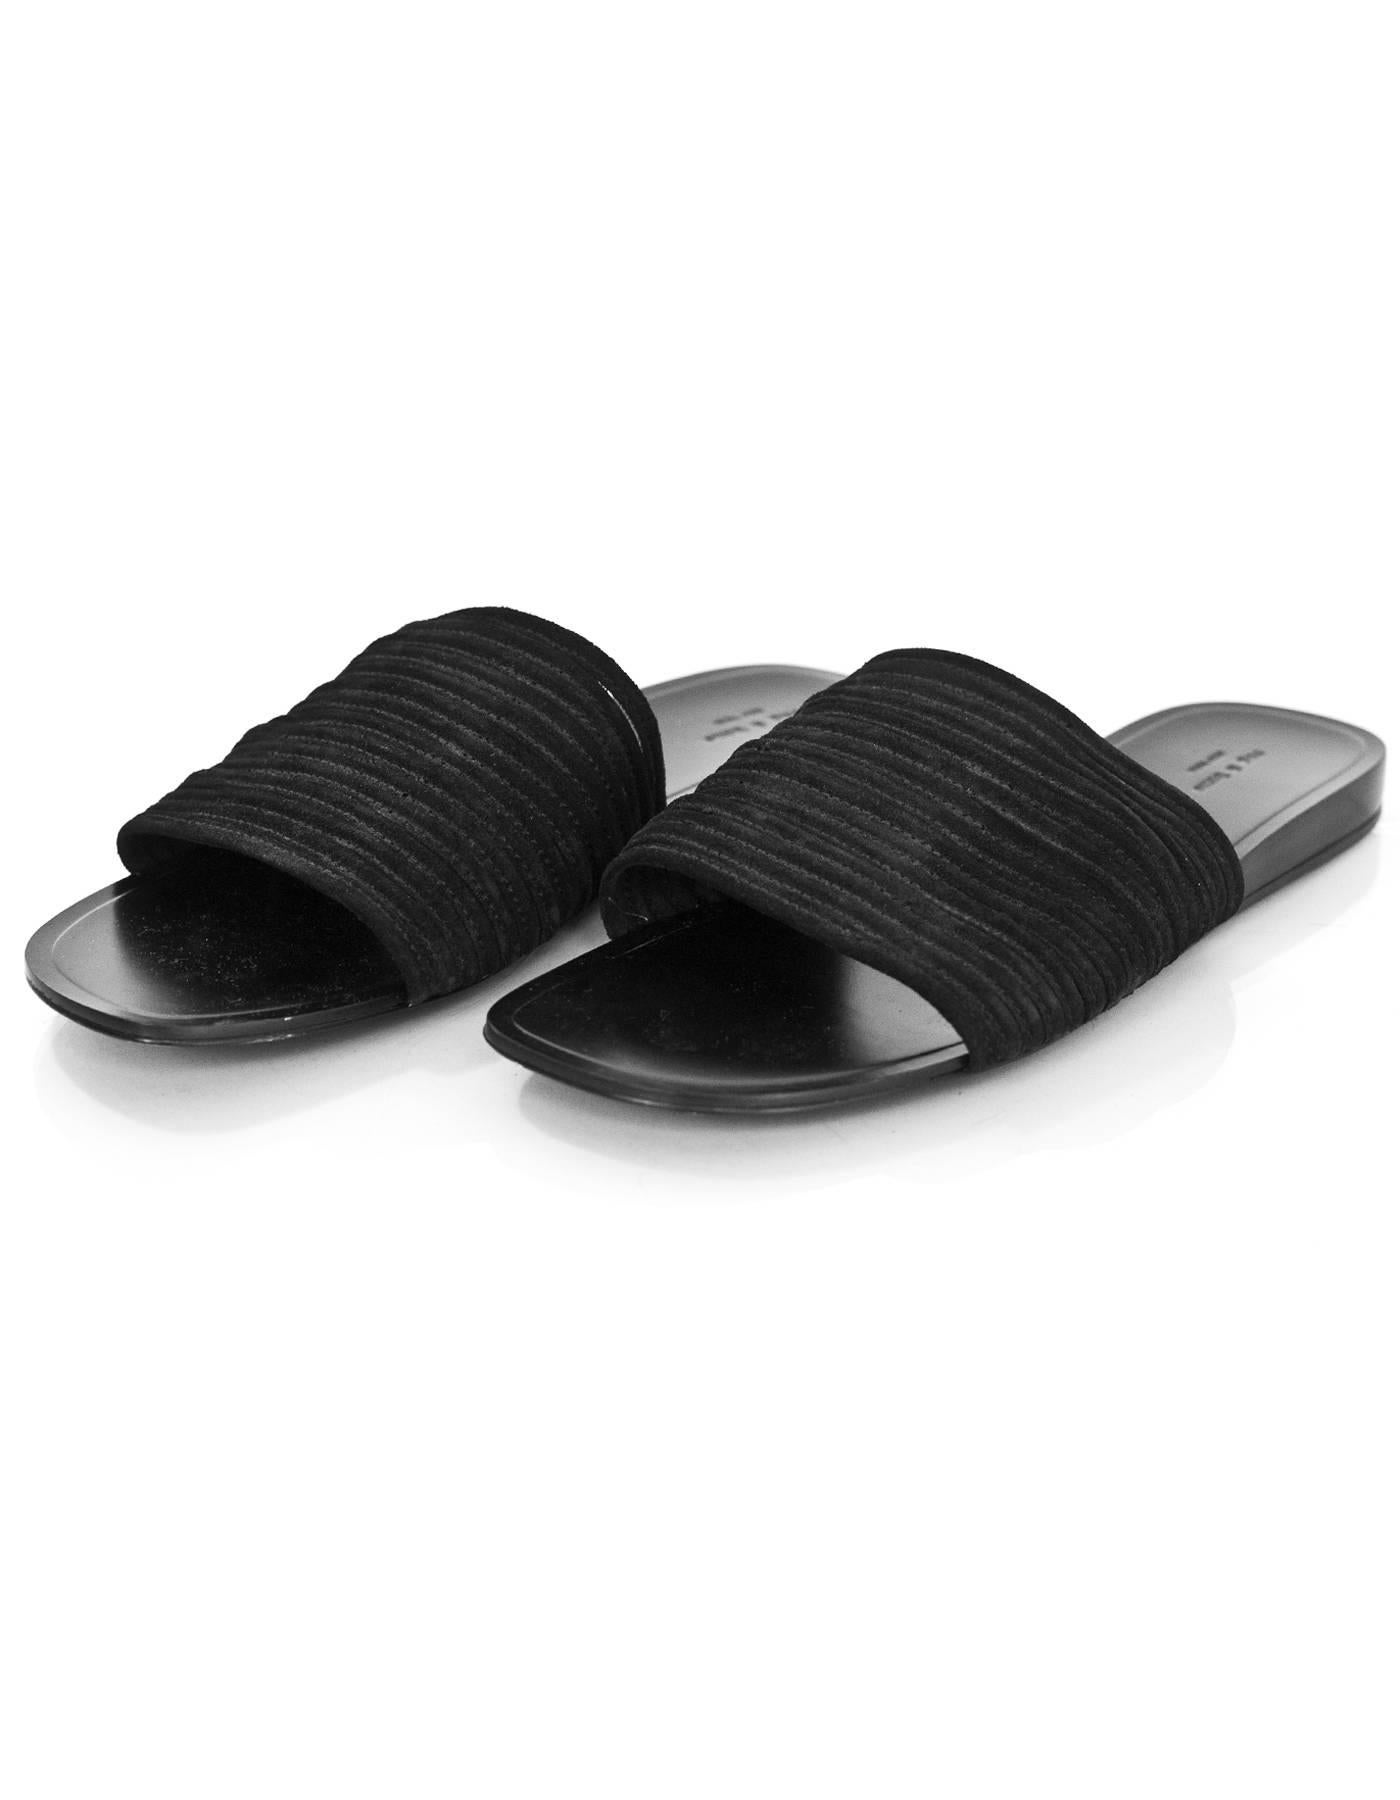 Rag & Bone Black Suede Cameron Slide Sandals Sz 39.5

Made In: China
Color: Black
Materials: Suede
Closure/Opening: Slide on
Sole Stamp: Rag & Bone New York 39.5
Retail Price: $295 + tax
Overall Condition: Excellent pre-owned condition with